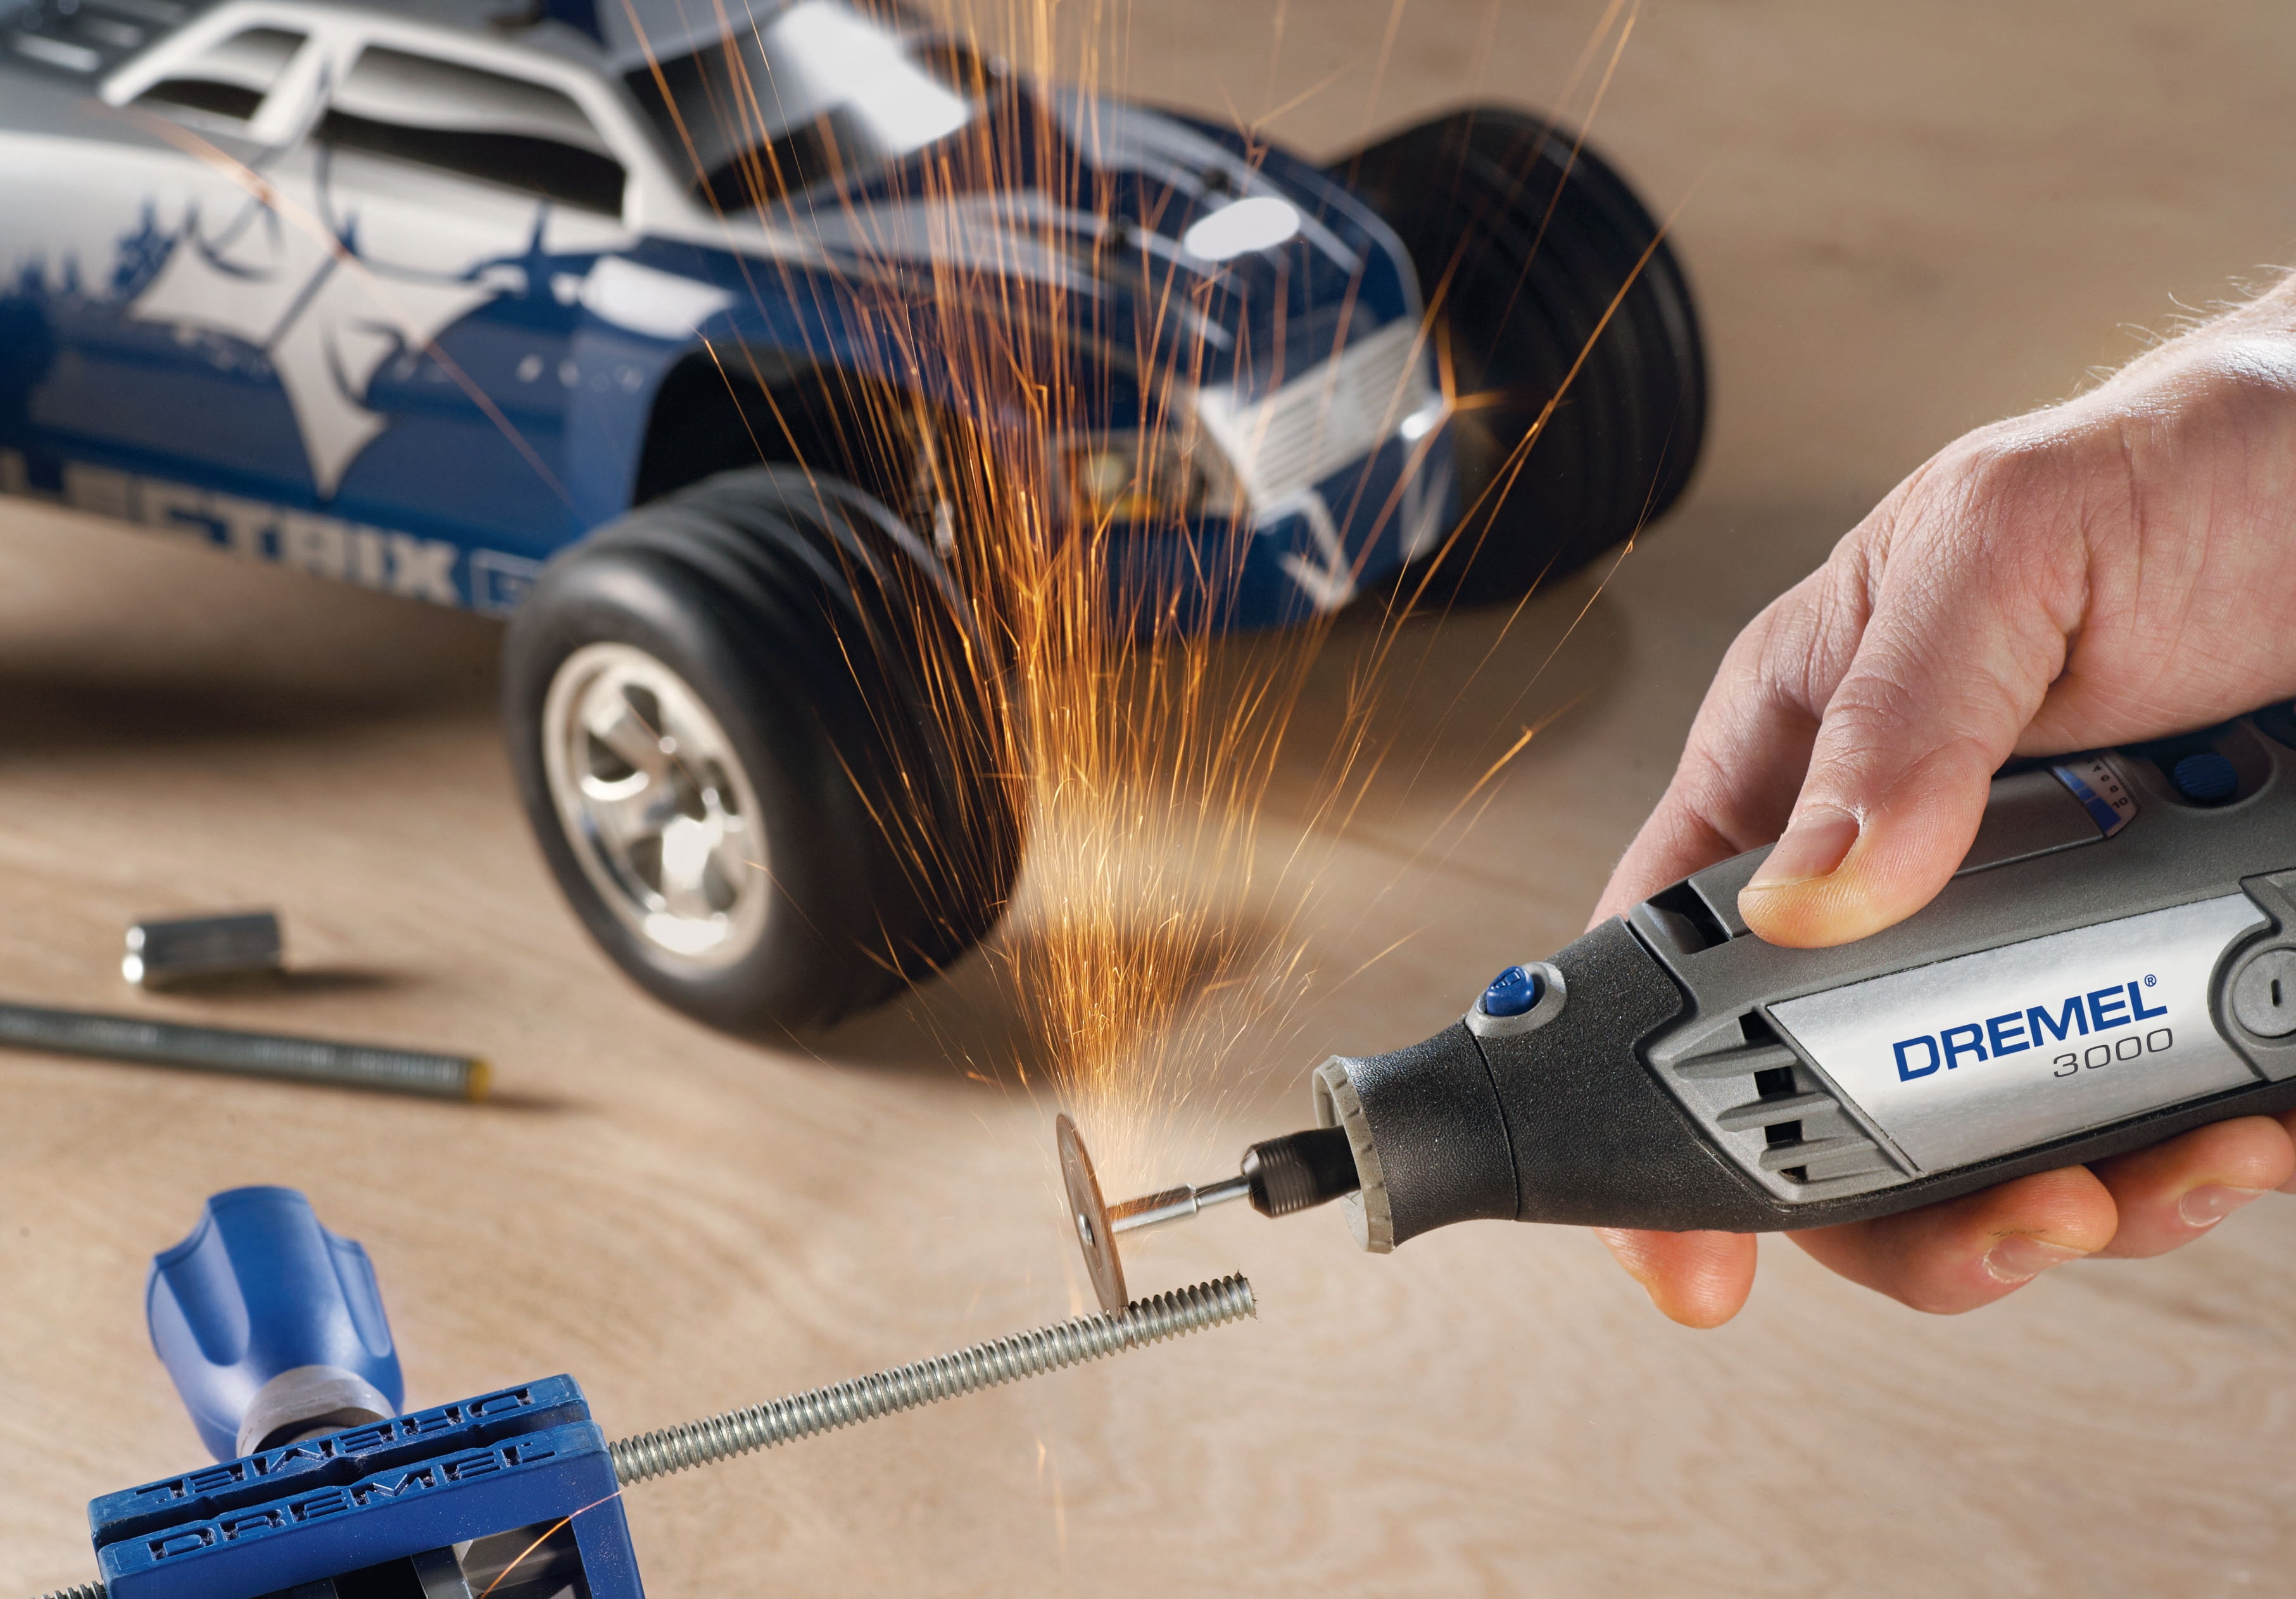 Dremel 3000-N/18 Variable Speed Rotary Tool with EZ Twist™ Nose Cap, 18  Accessories 